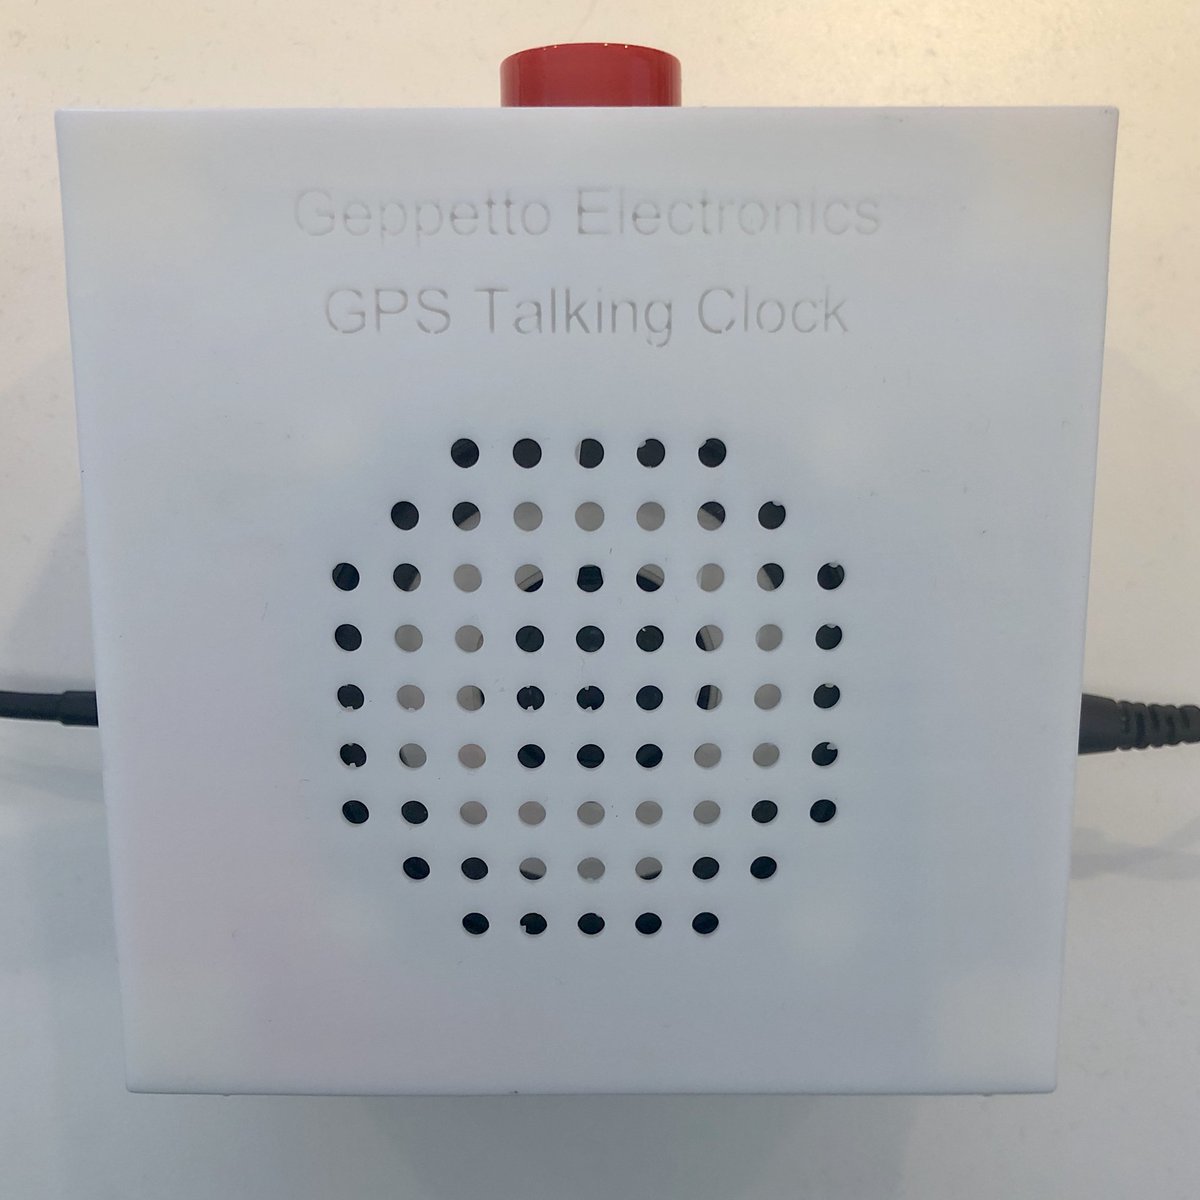 GPS Talking Clock from Geppetto Electronics on Tindie